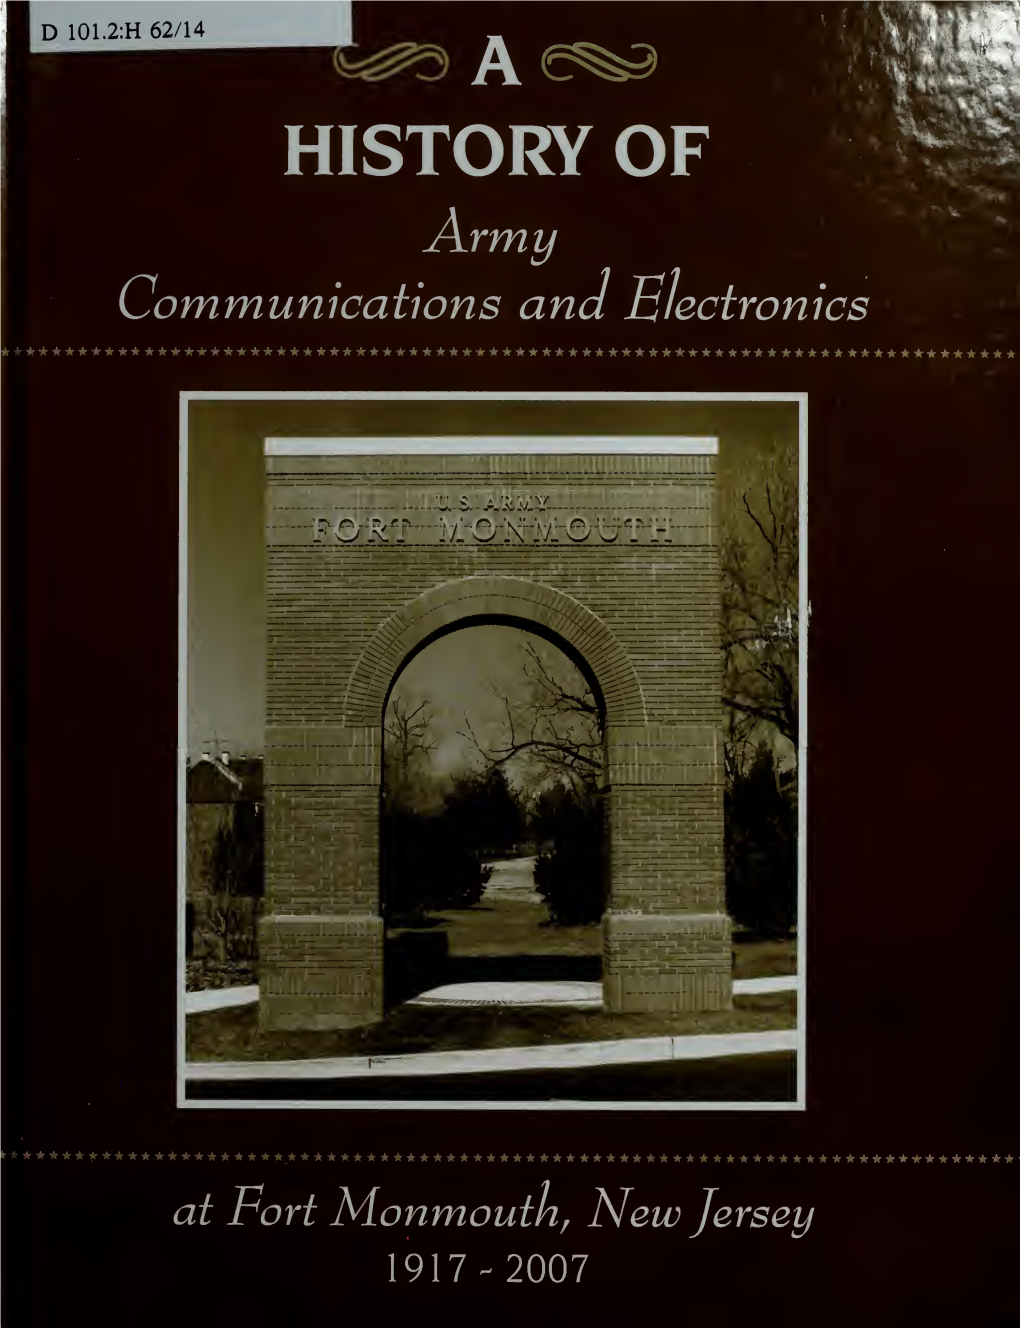 A History of Army Communications and Electronics at Fort Monmouth, New